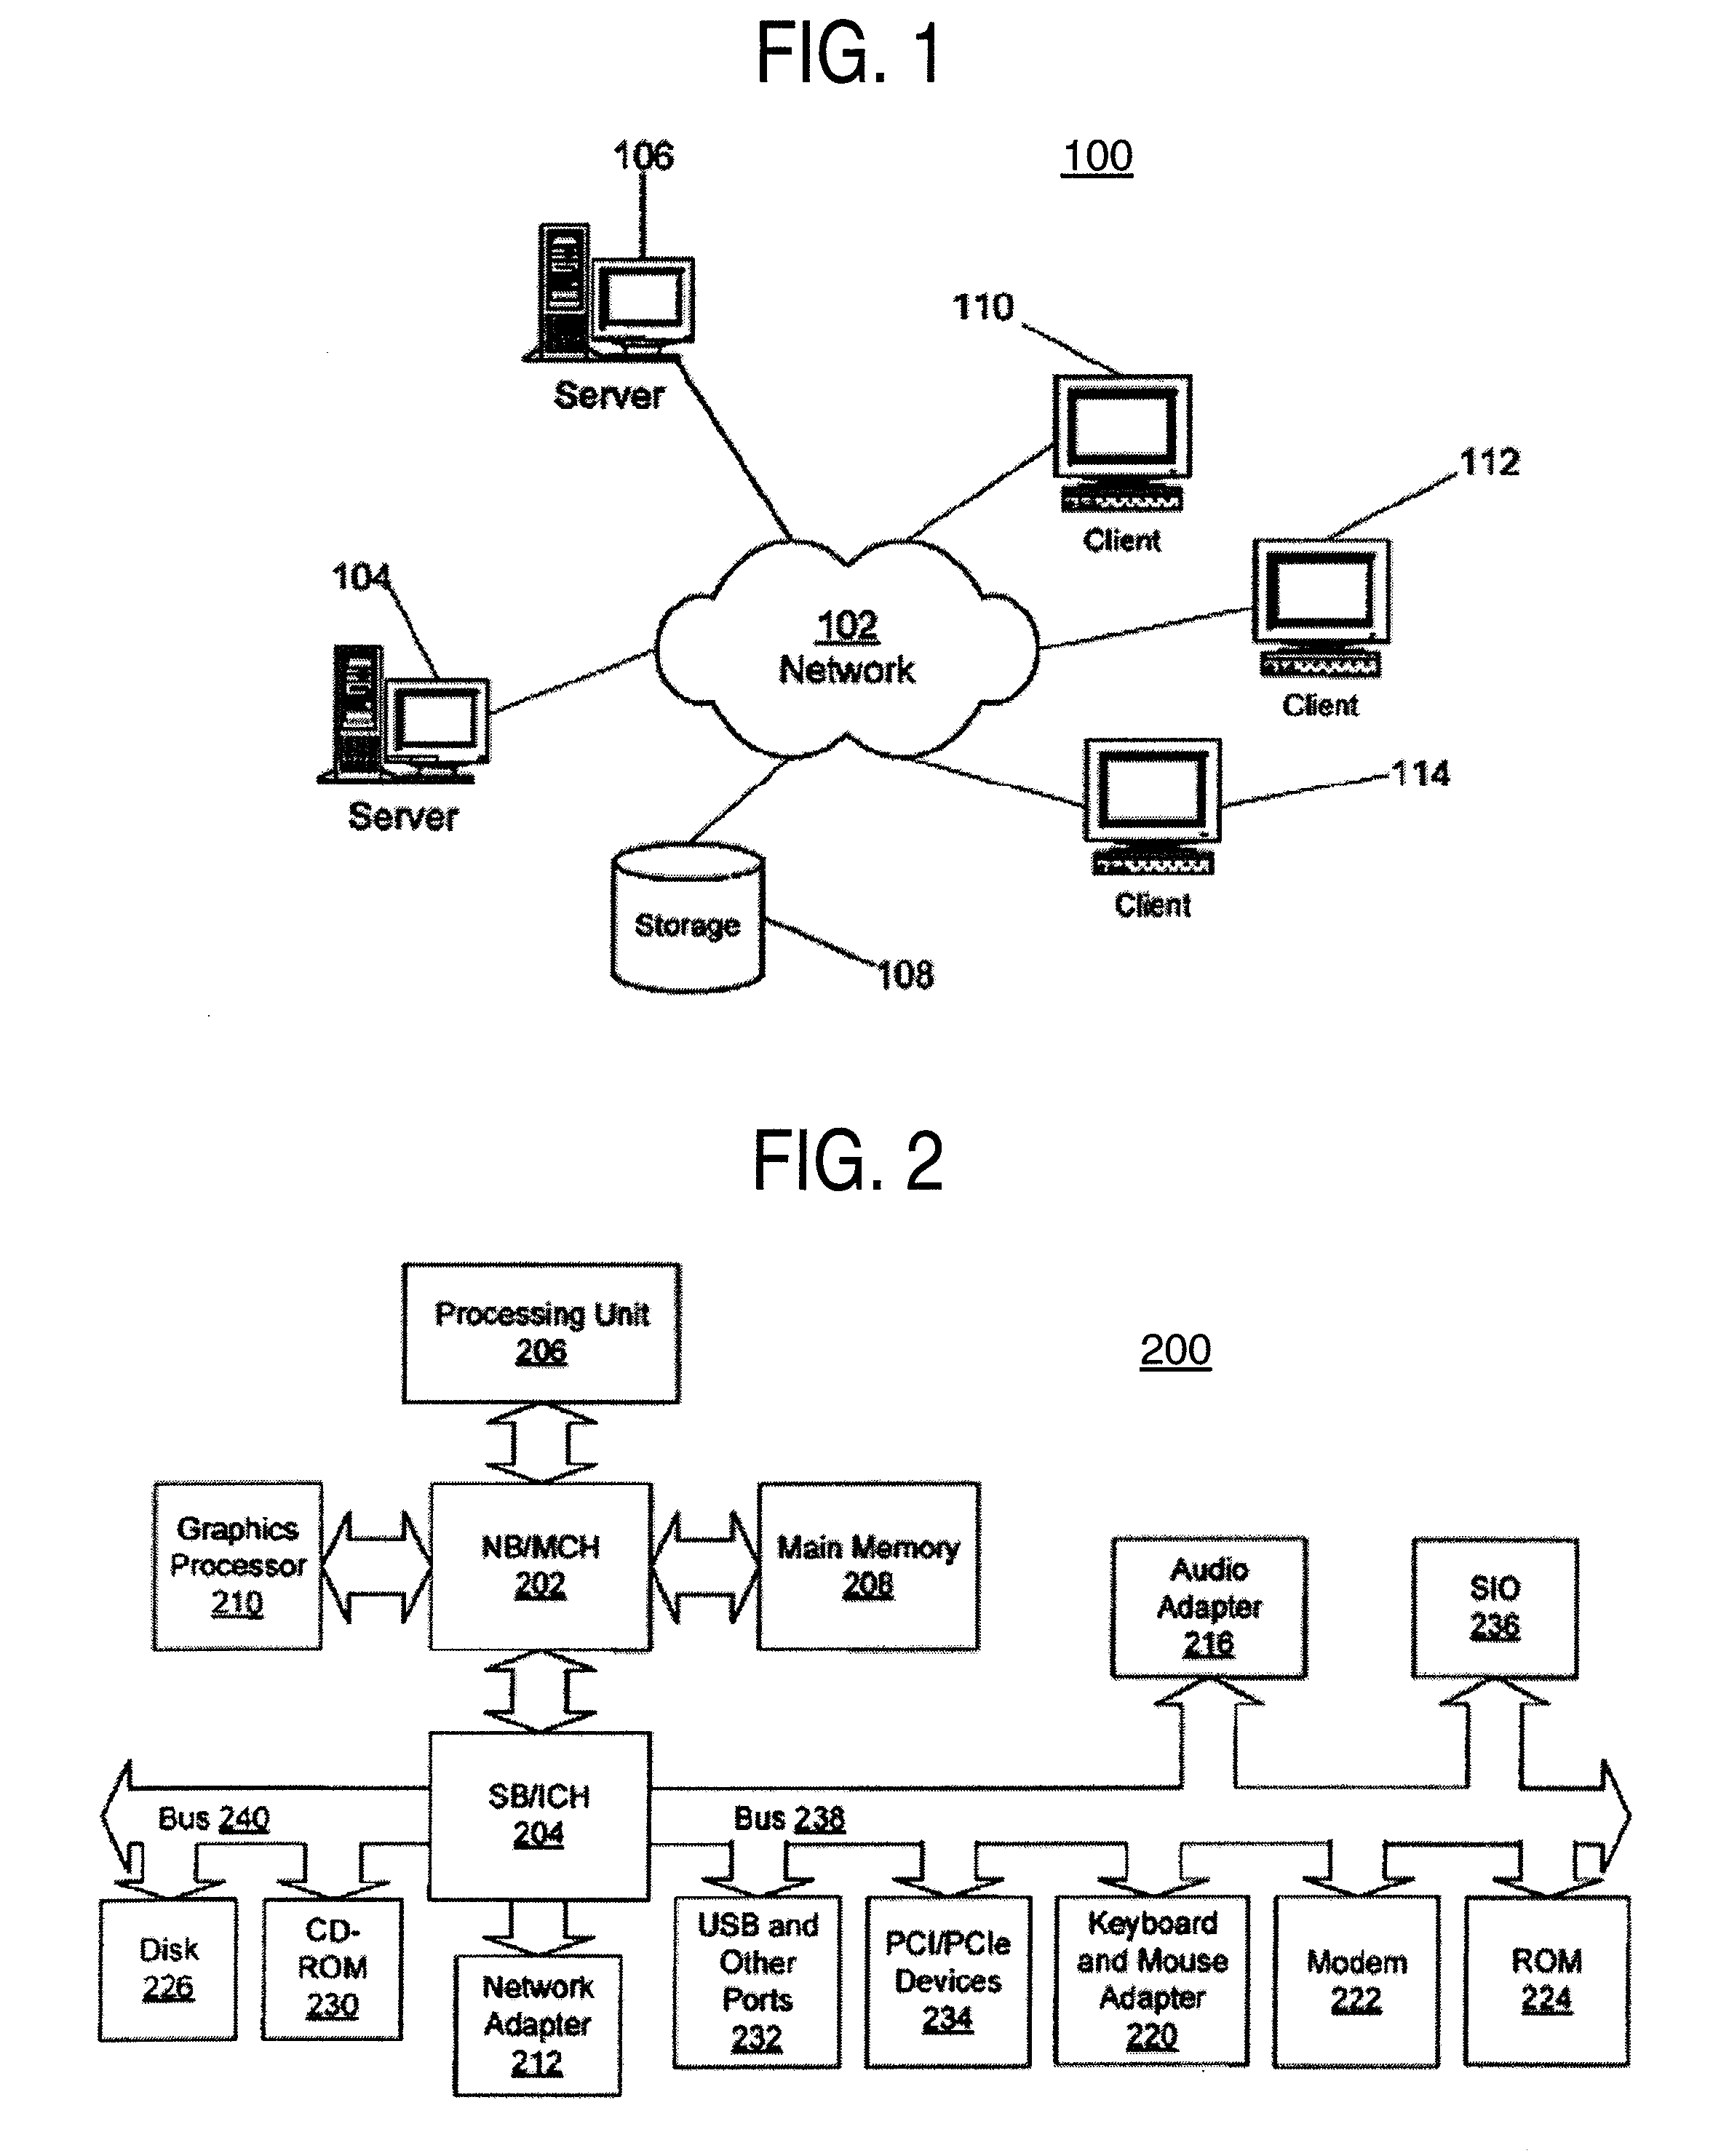 Method and Apparatus for Template-Based Provisioning in a Service Delivery Environment